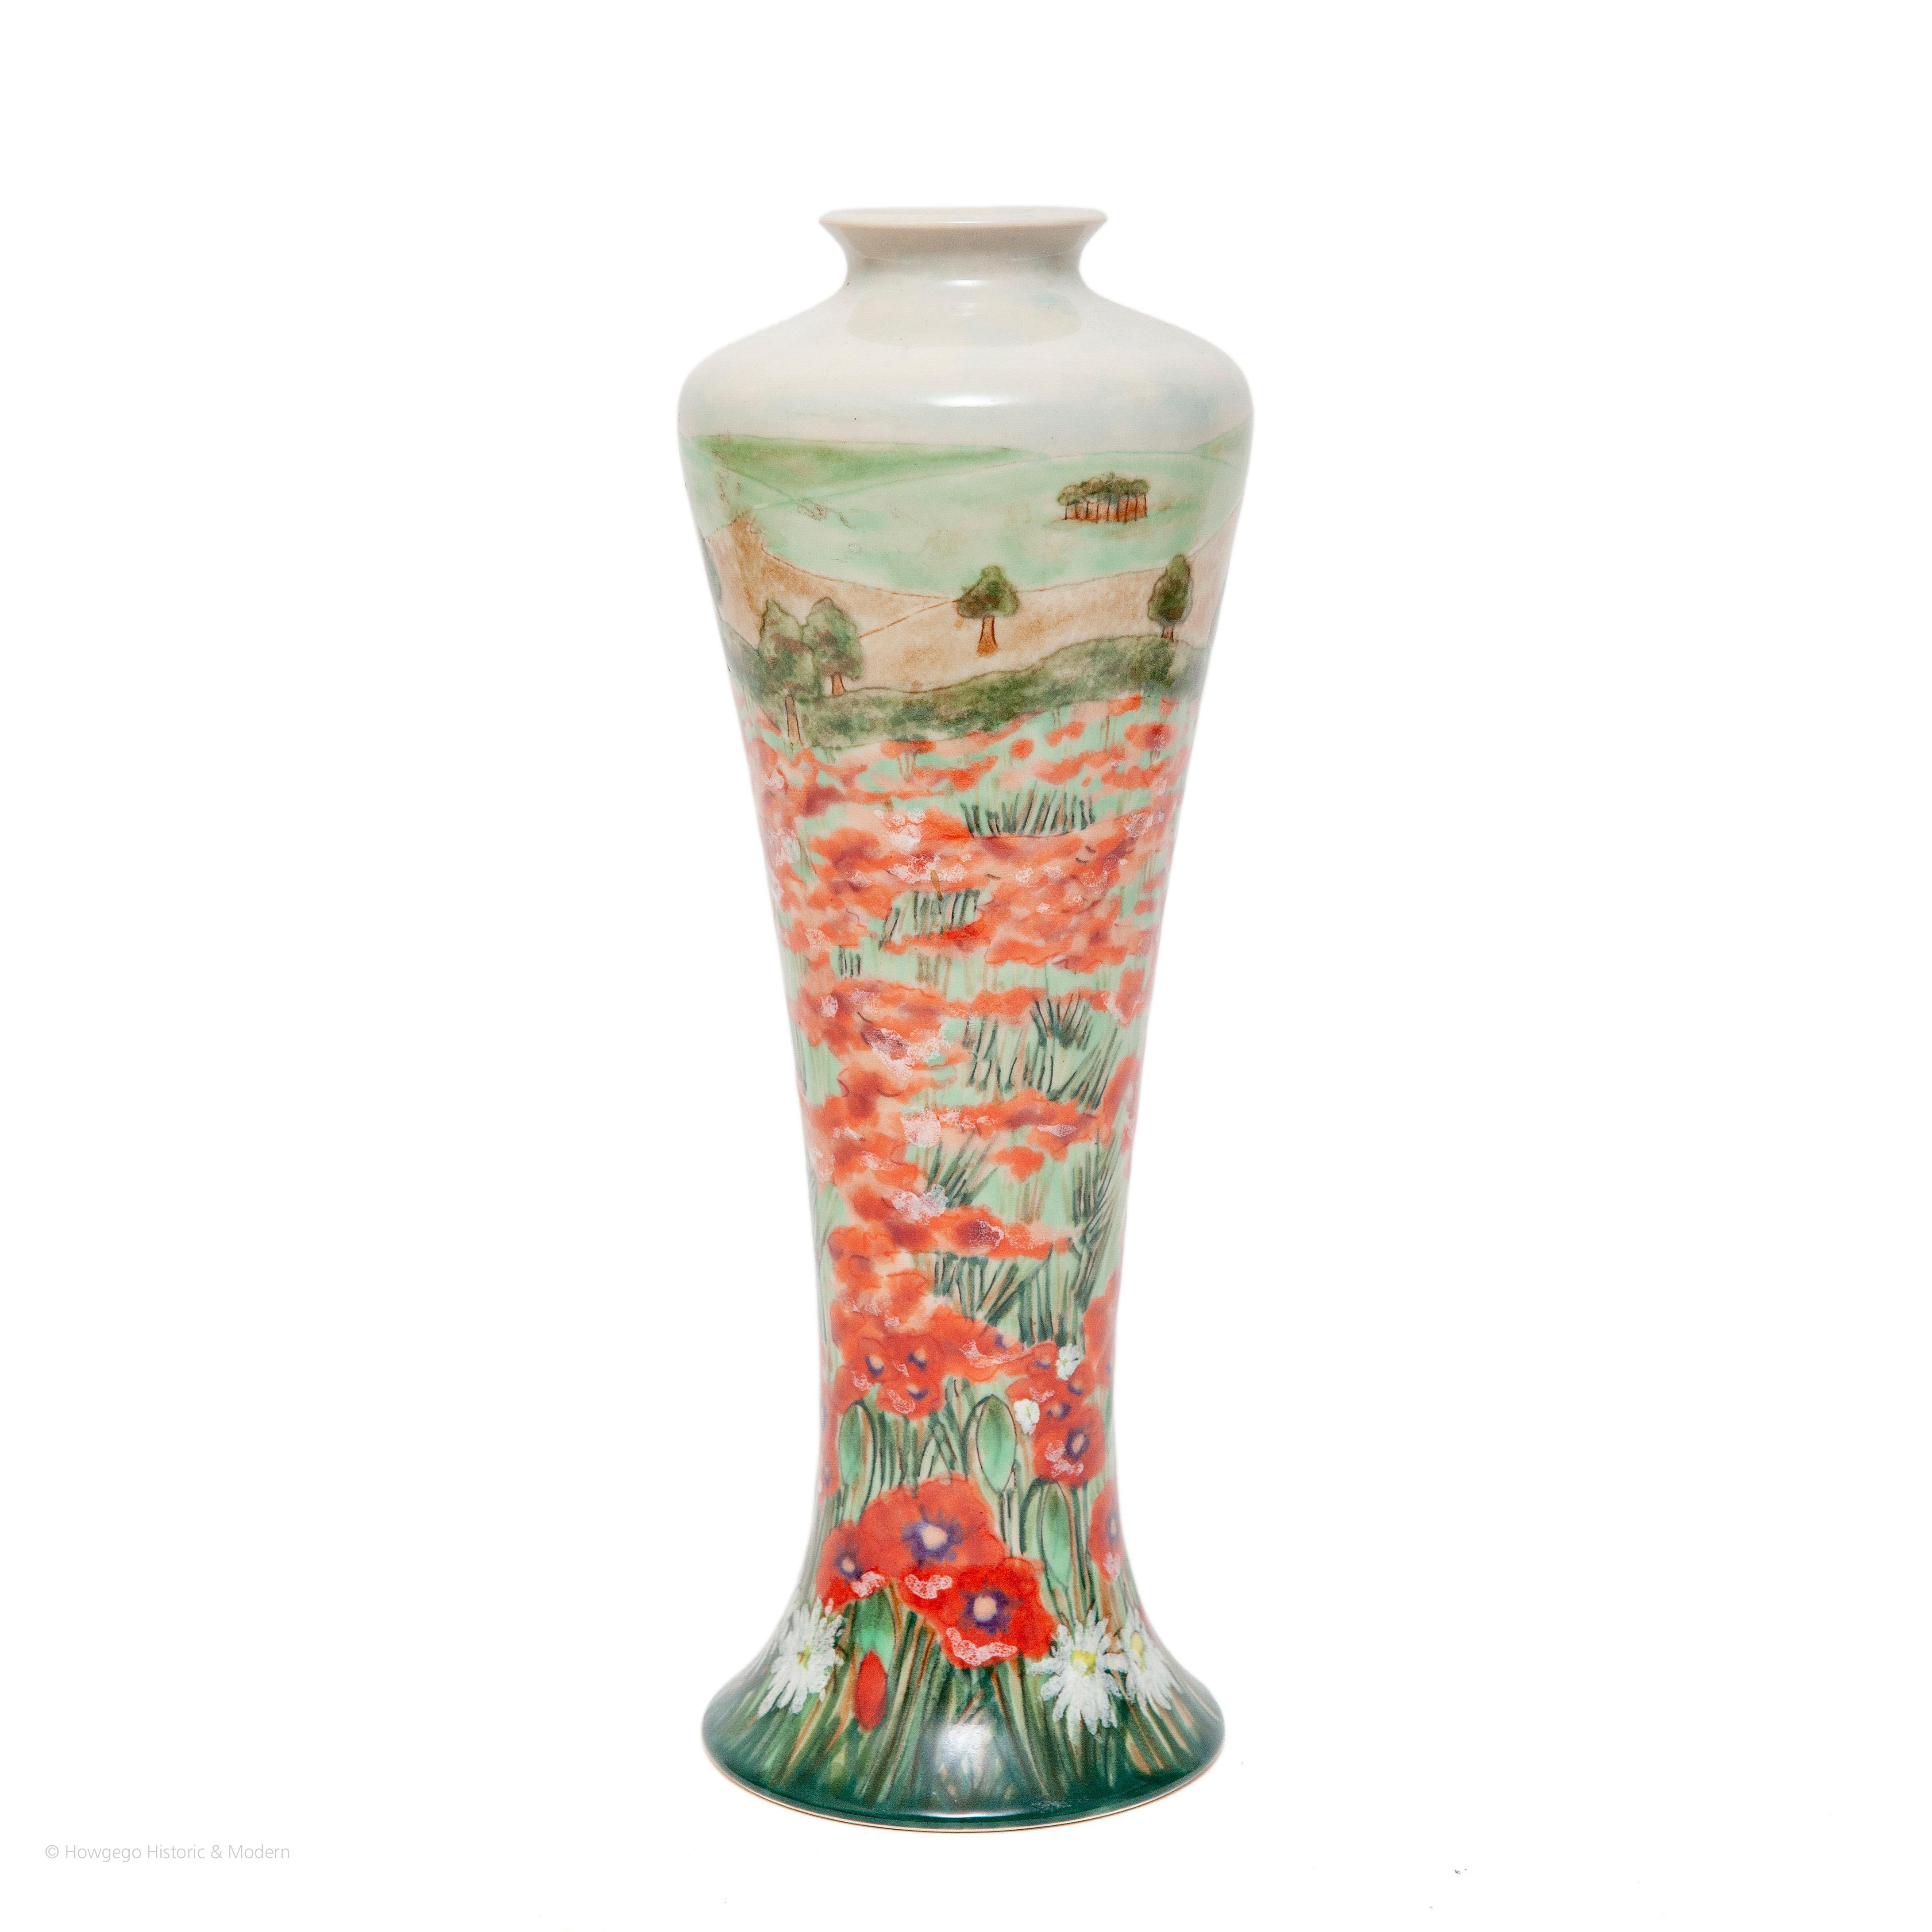 Cobridge, Poppyfields Limited Edition vase, MARKED 18/75 UNDERNEATH, 2000, 10” high
Delicate, injecting the beauty and delight of poppyfields into the interior
Great perspective with the detailing of the poppy flowerheads in the foreground of the